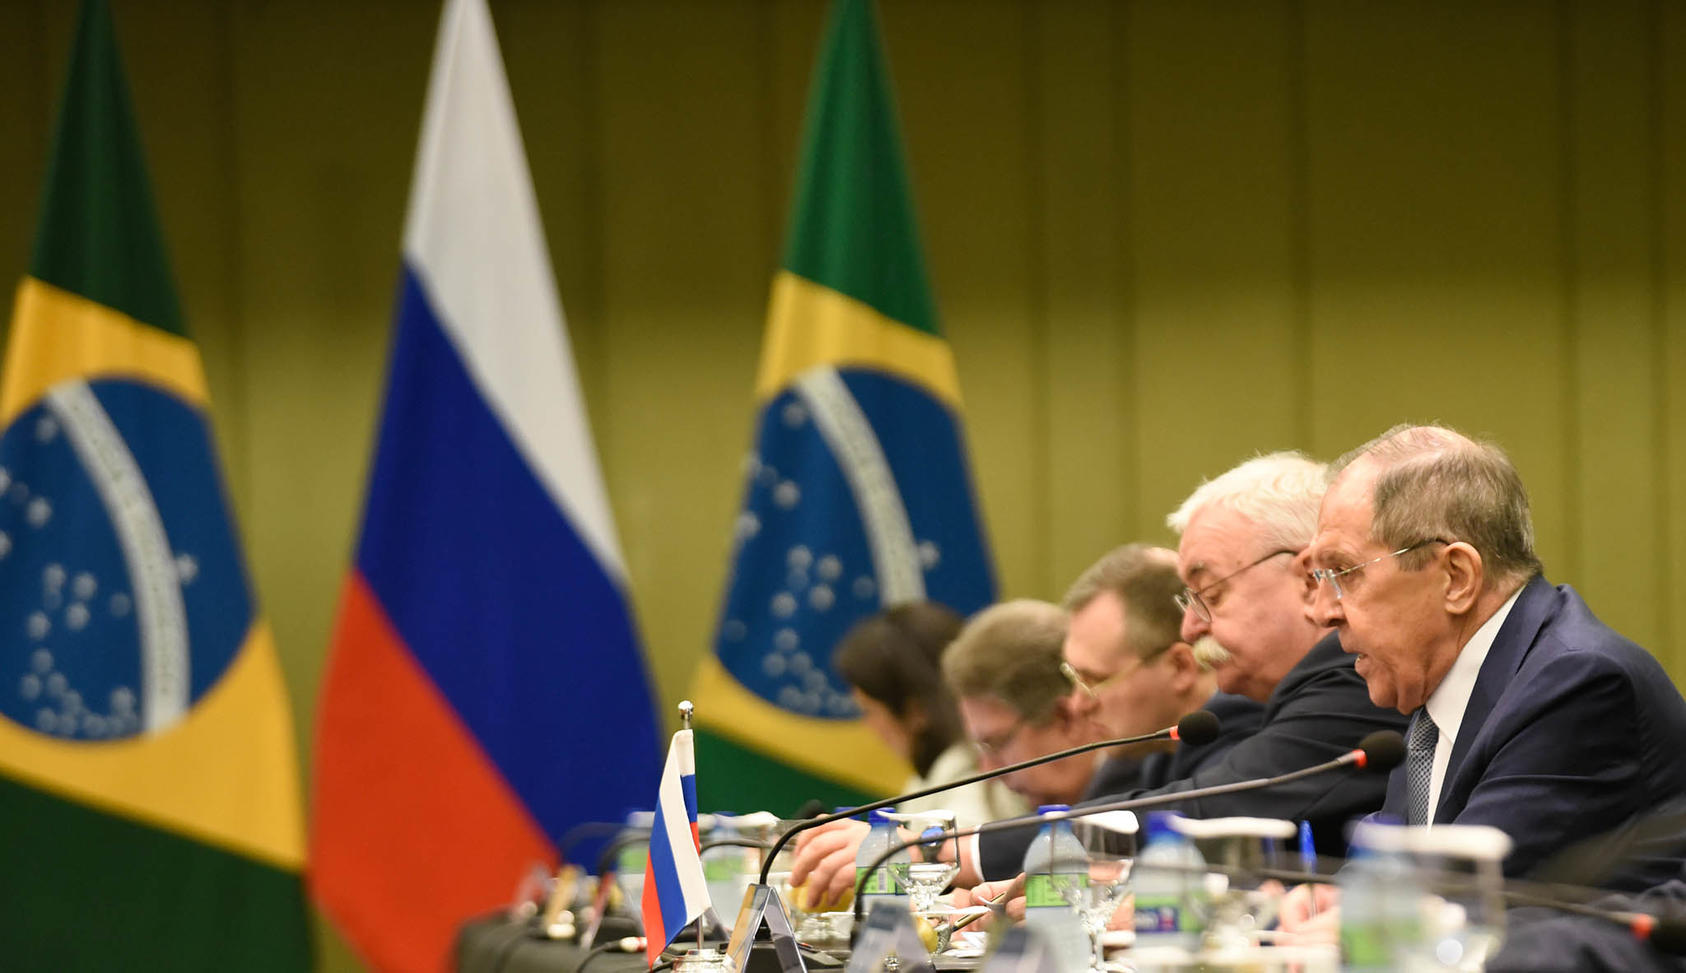 Russian Foreign Minister Sergey Lavrov meeting with his Brazilian counterpart in Brasilia, Brazil. April 17, 2023. (Brazil Ministry of Foreign Affairs/Flickr)